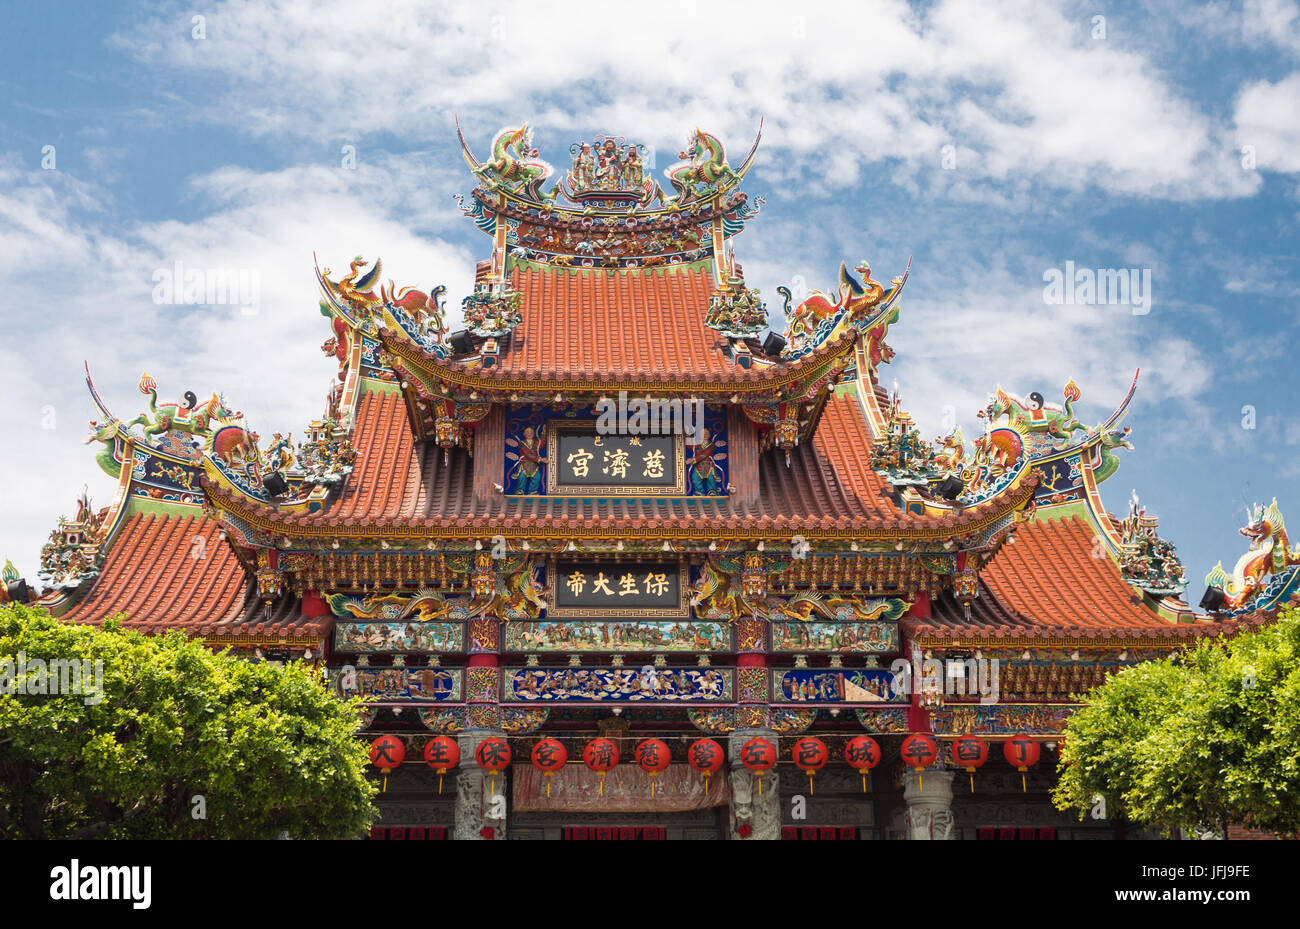 Taiwan, Kaohsiung City, Tsoying District, Lotus Pond, Temple of enlightment Stock Photo